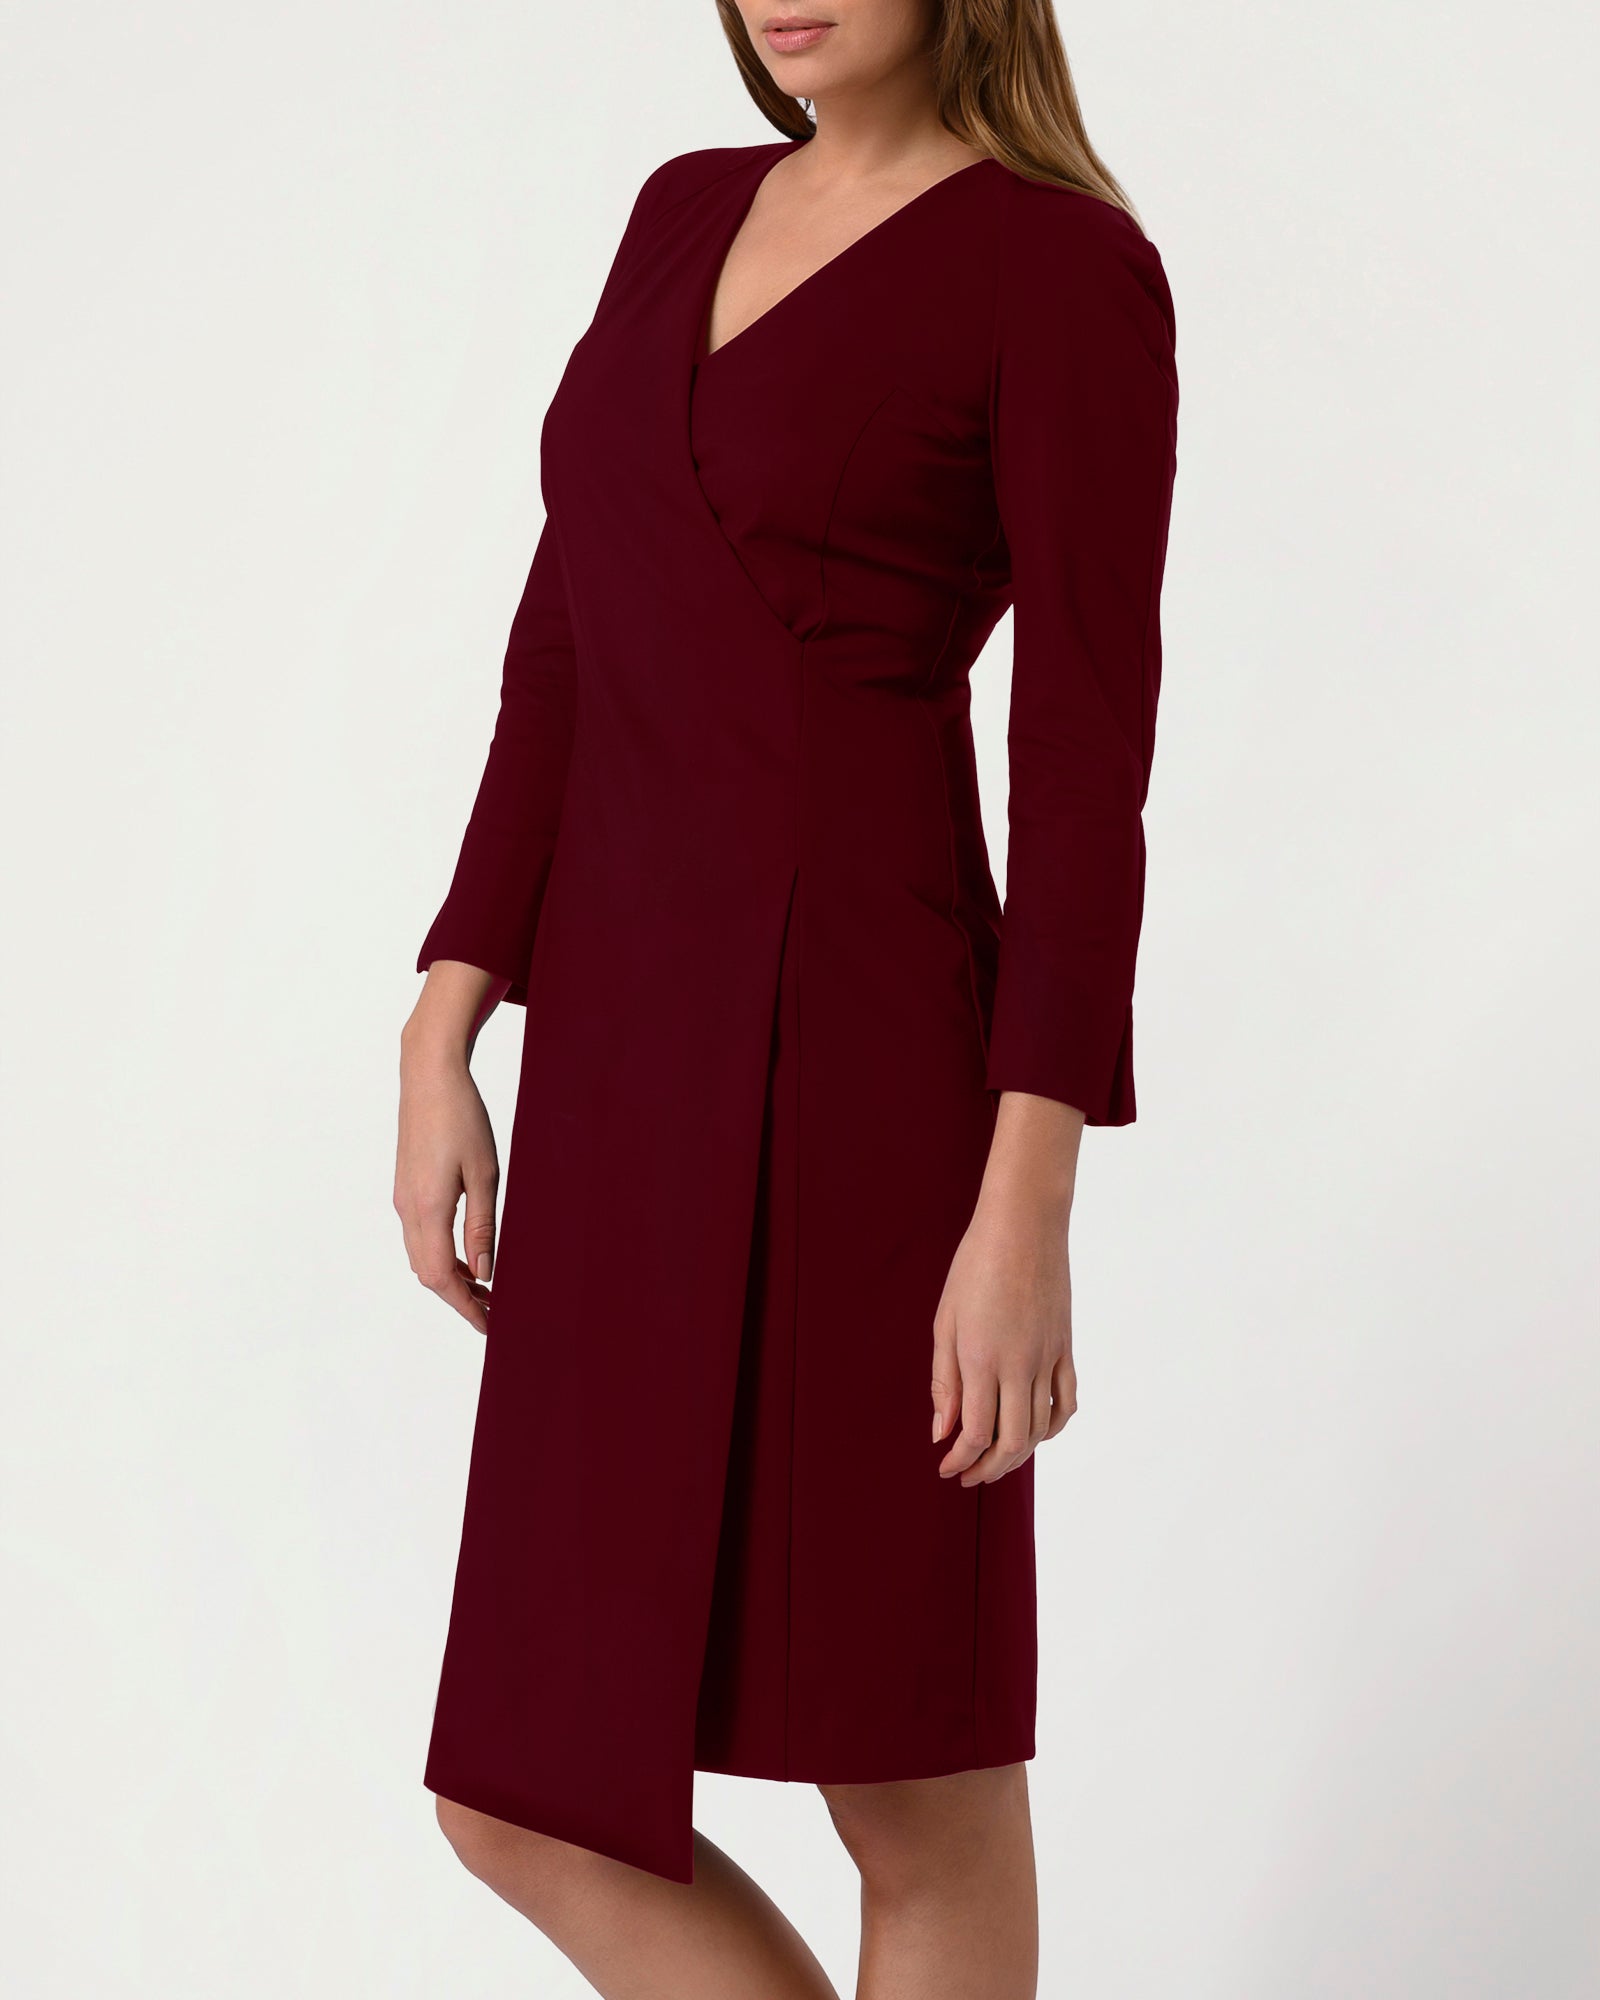 All Wrapped Up Dress Wine - Final Sale